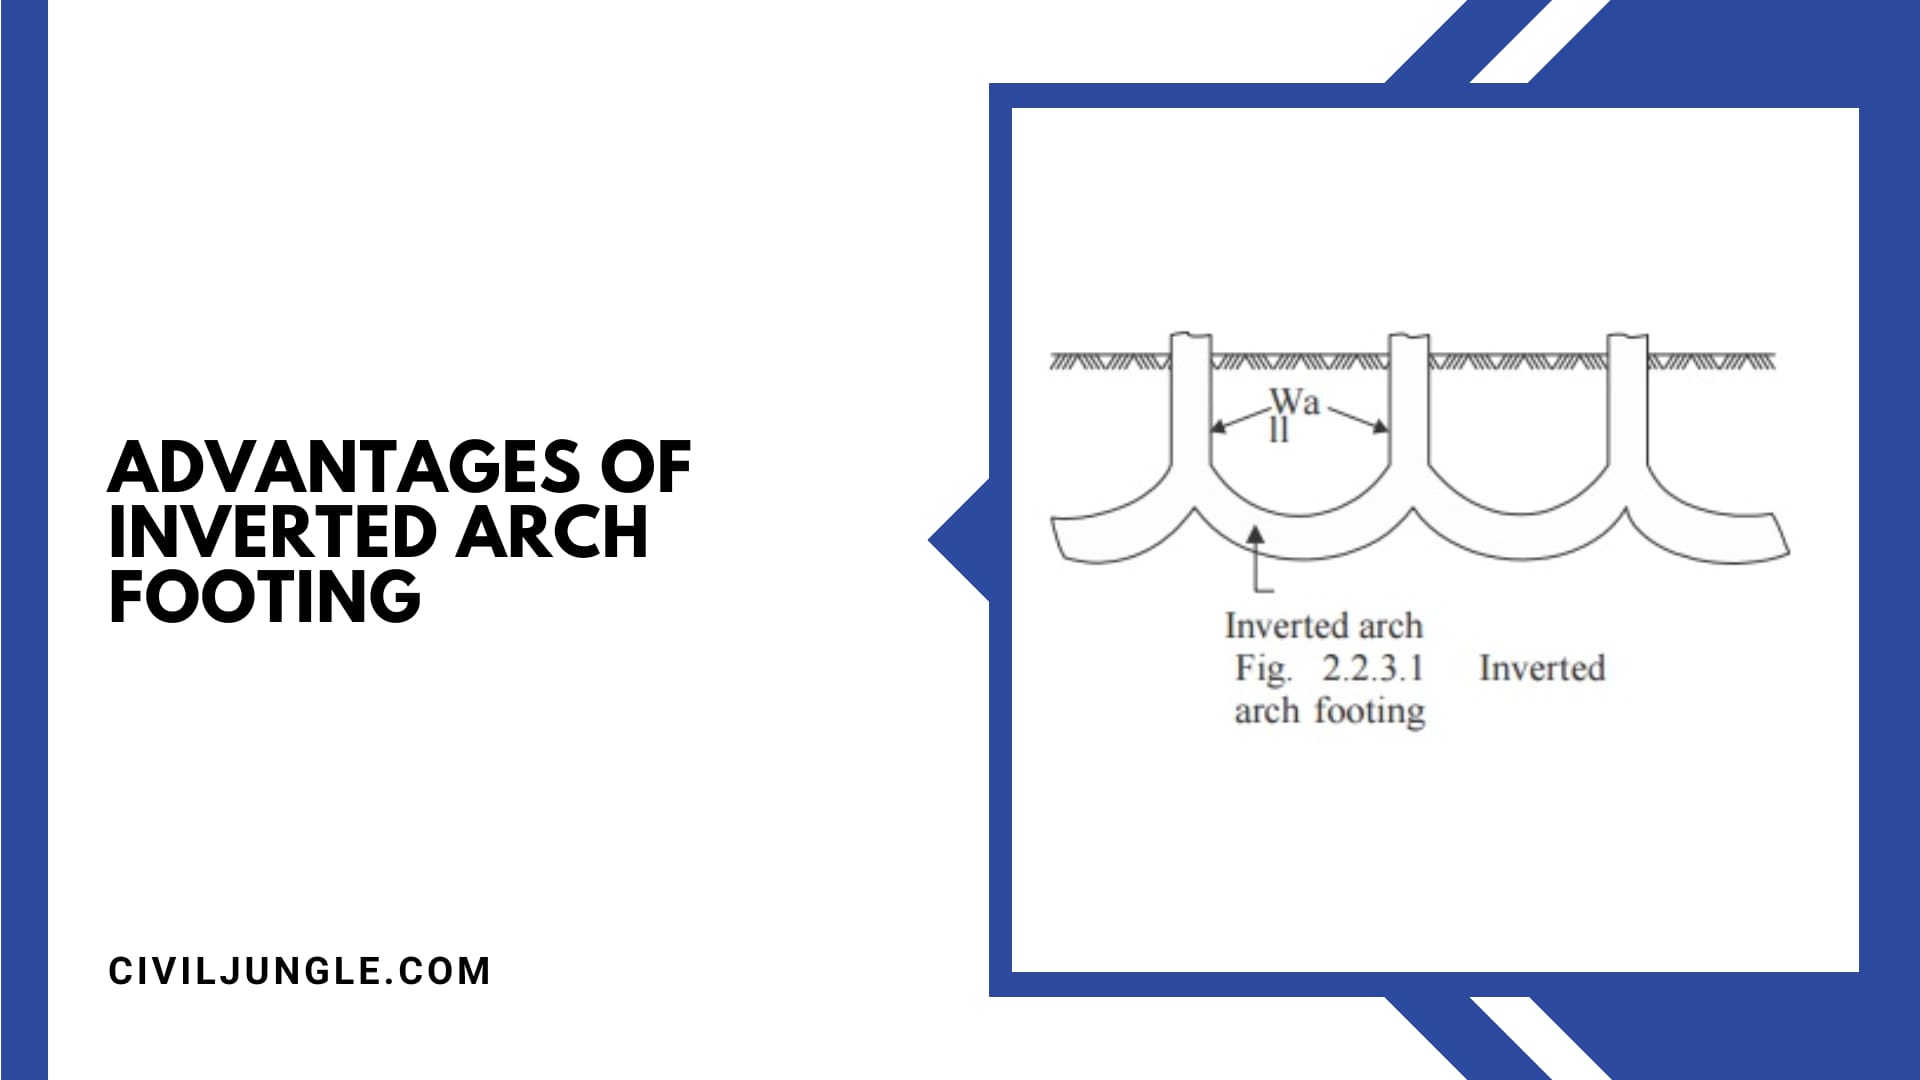 Advantages of Inverted Arch Footing